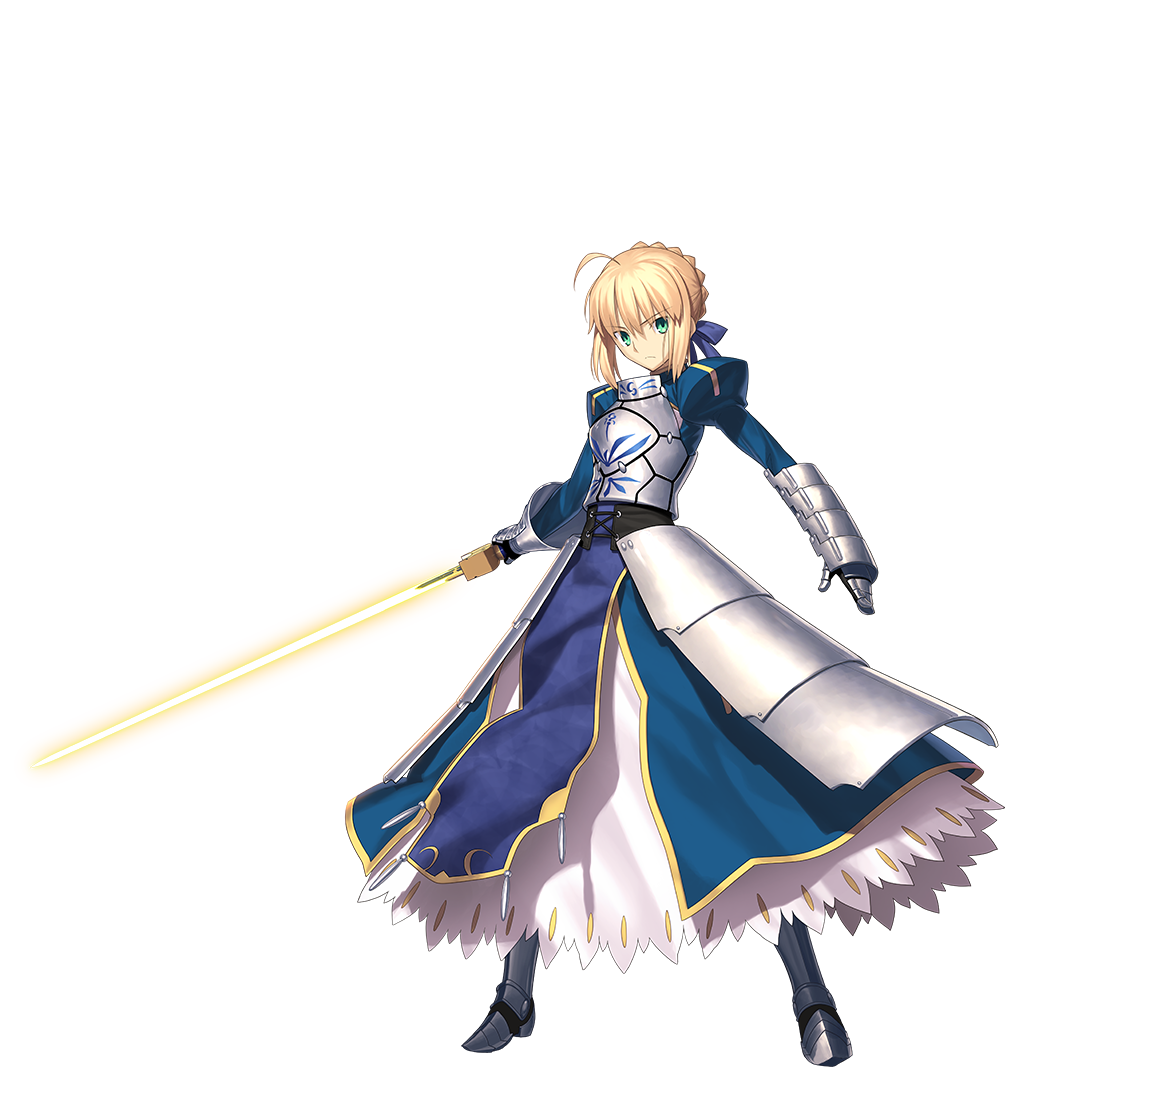 Download Saber (Fate Series) Anime Fate/Stay Night Wallpaper